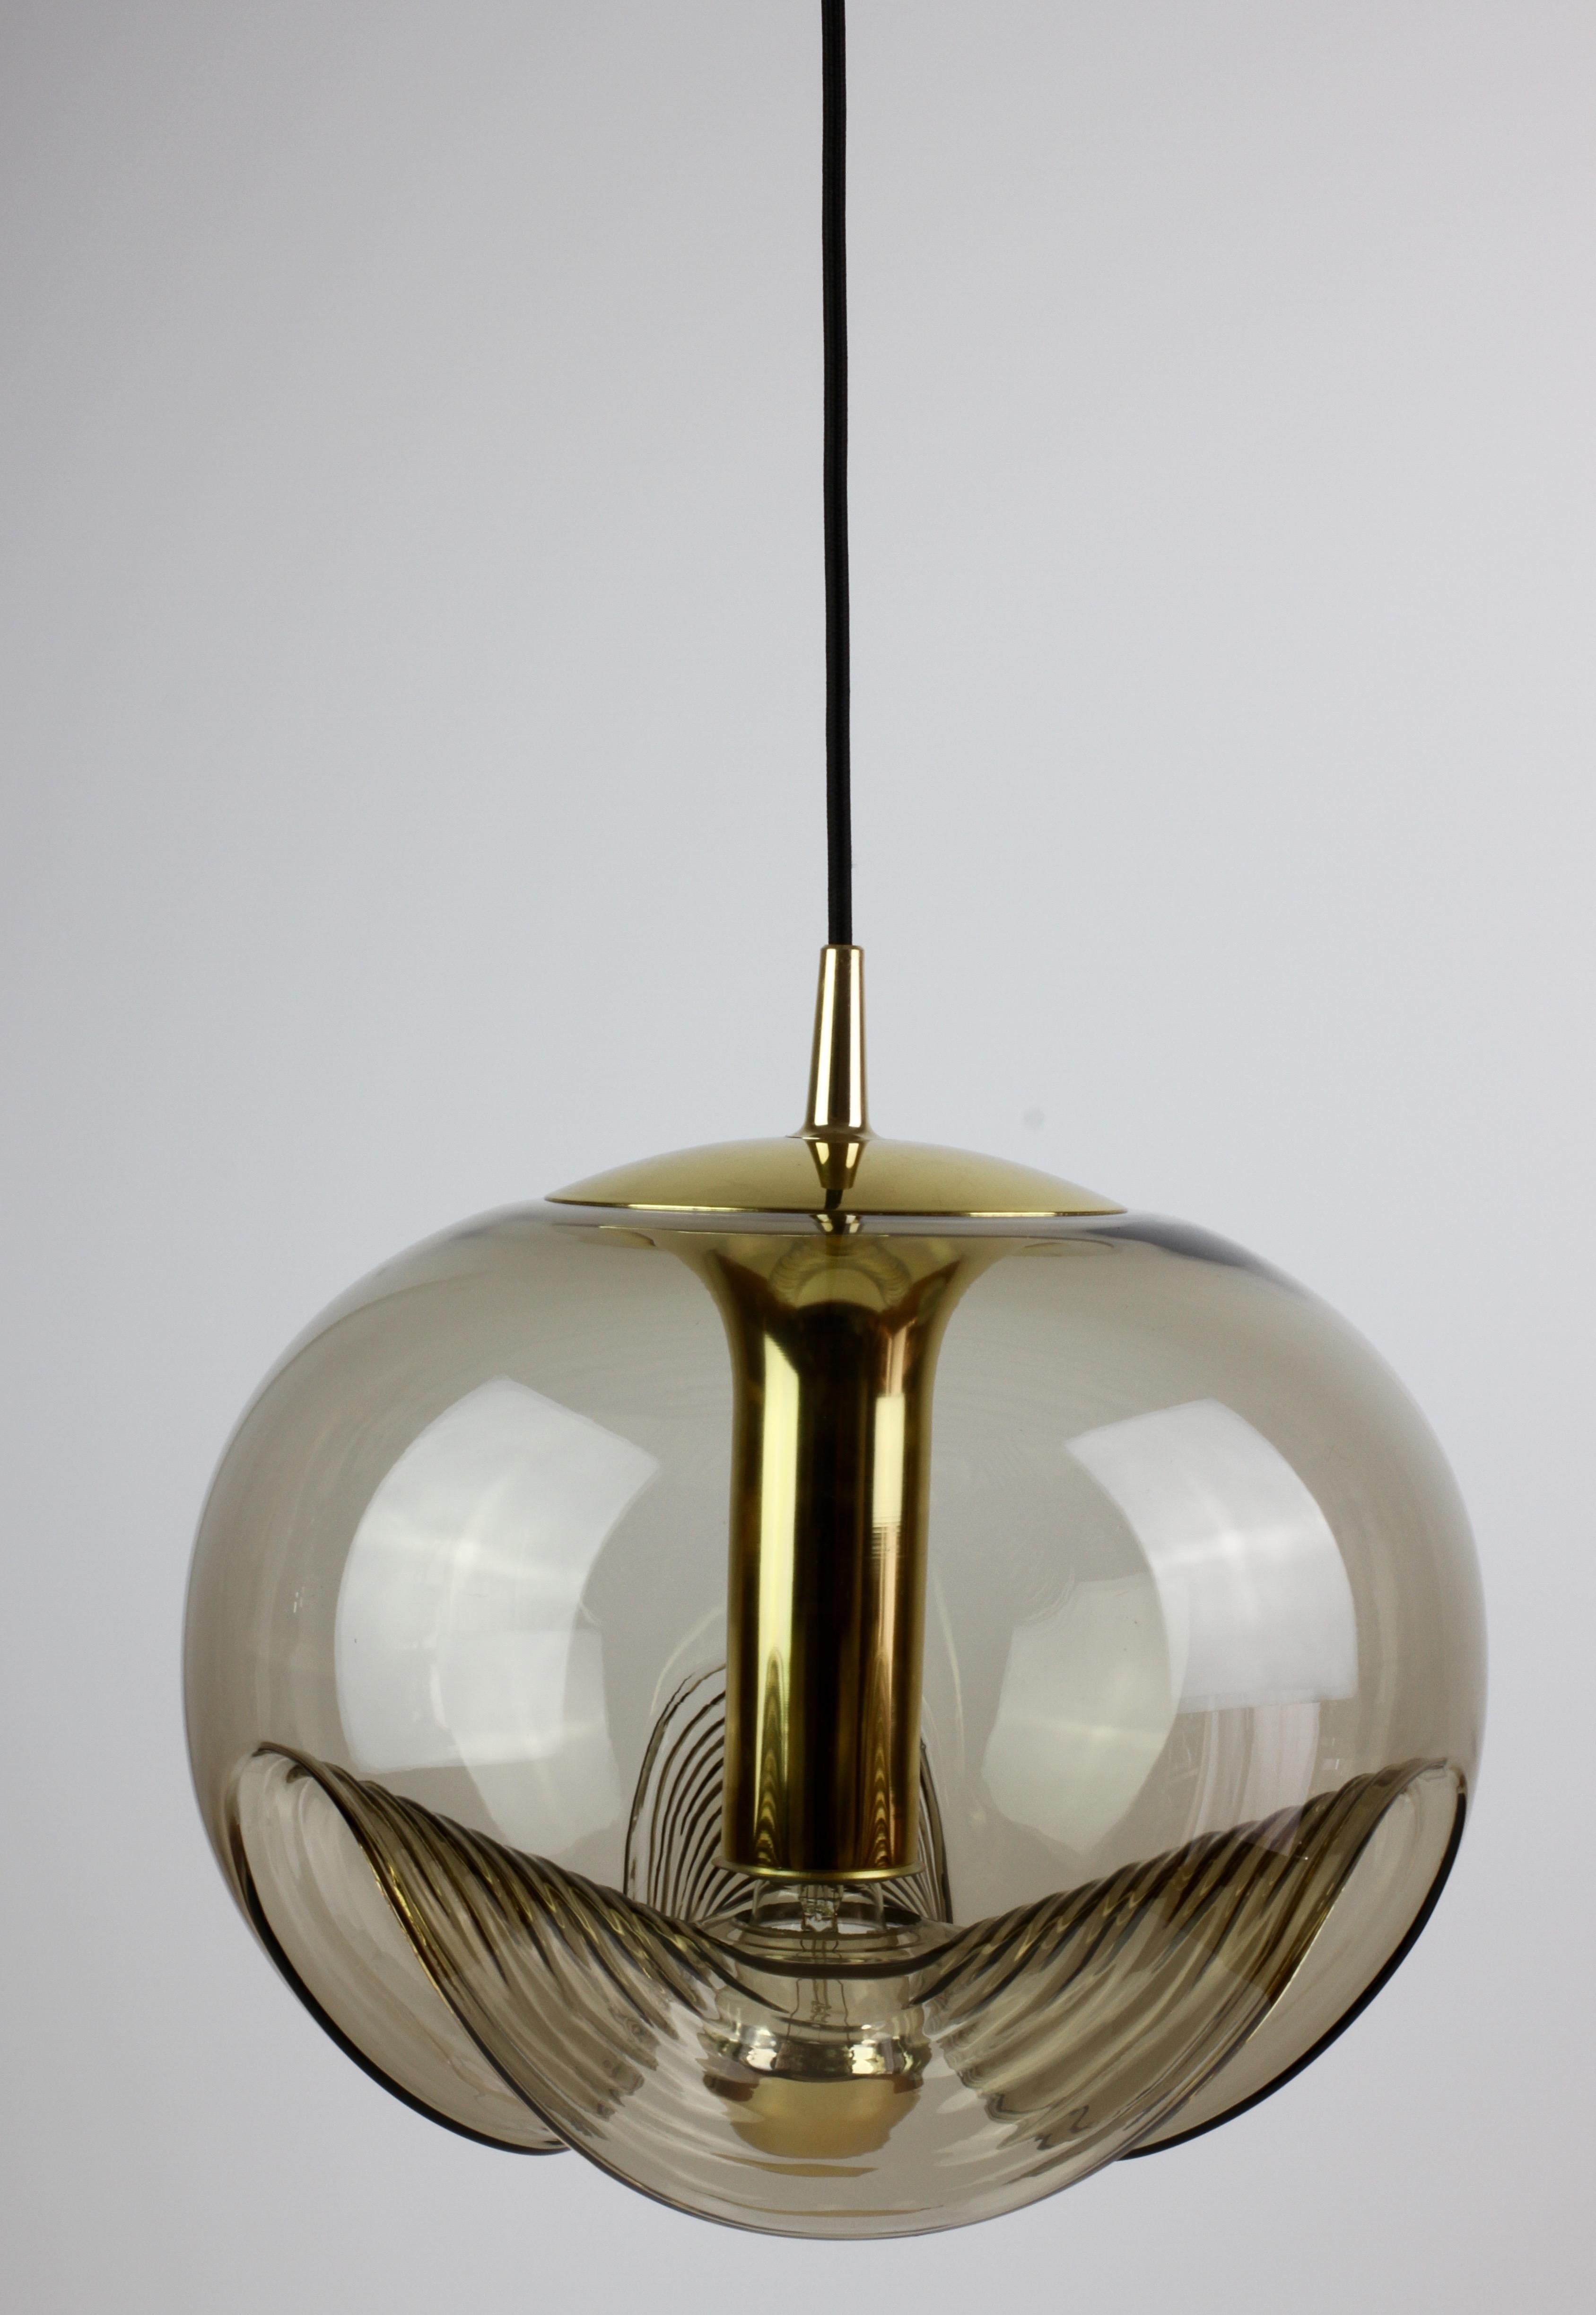 Molded 1 of 2 Peill & Putzler Large Biomorphic Hanging Pendant Lights Lamps, C. 1975 For Sale